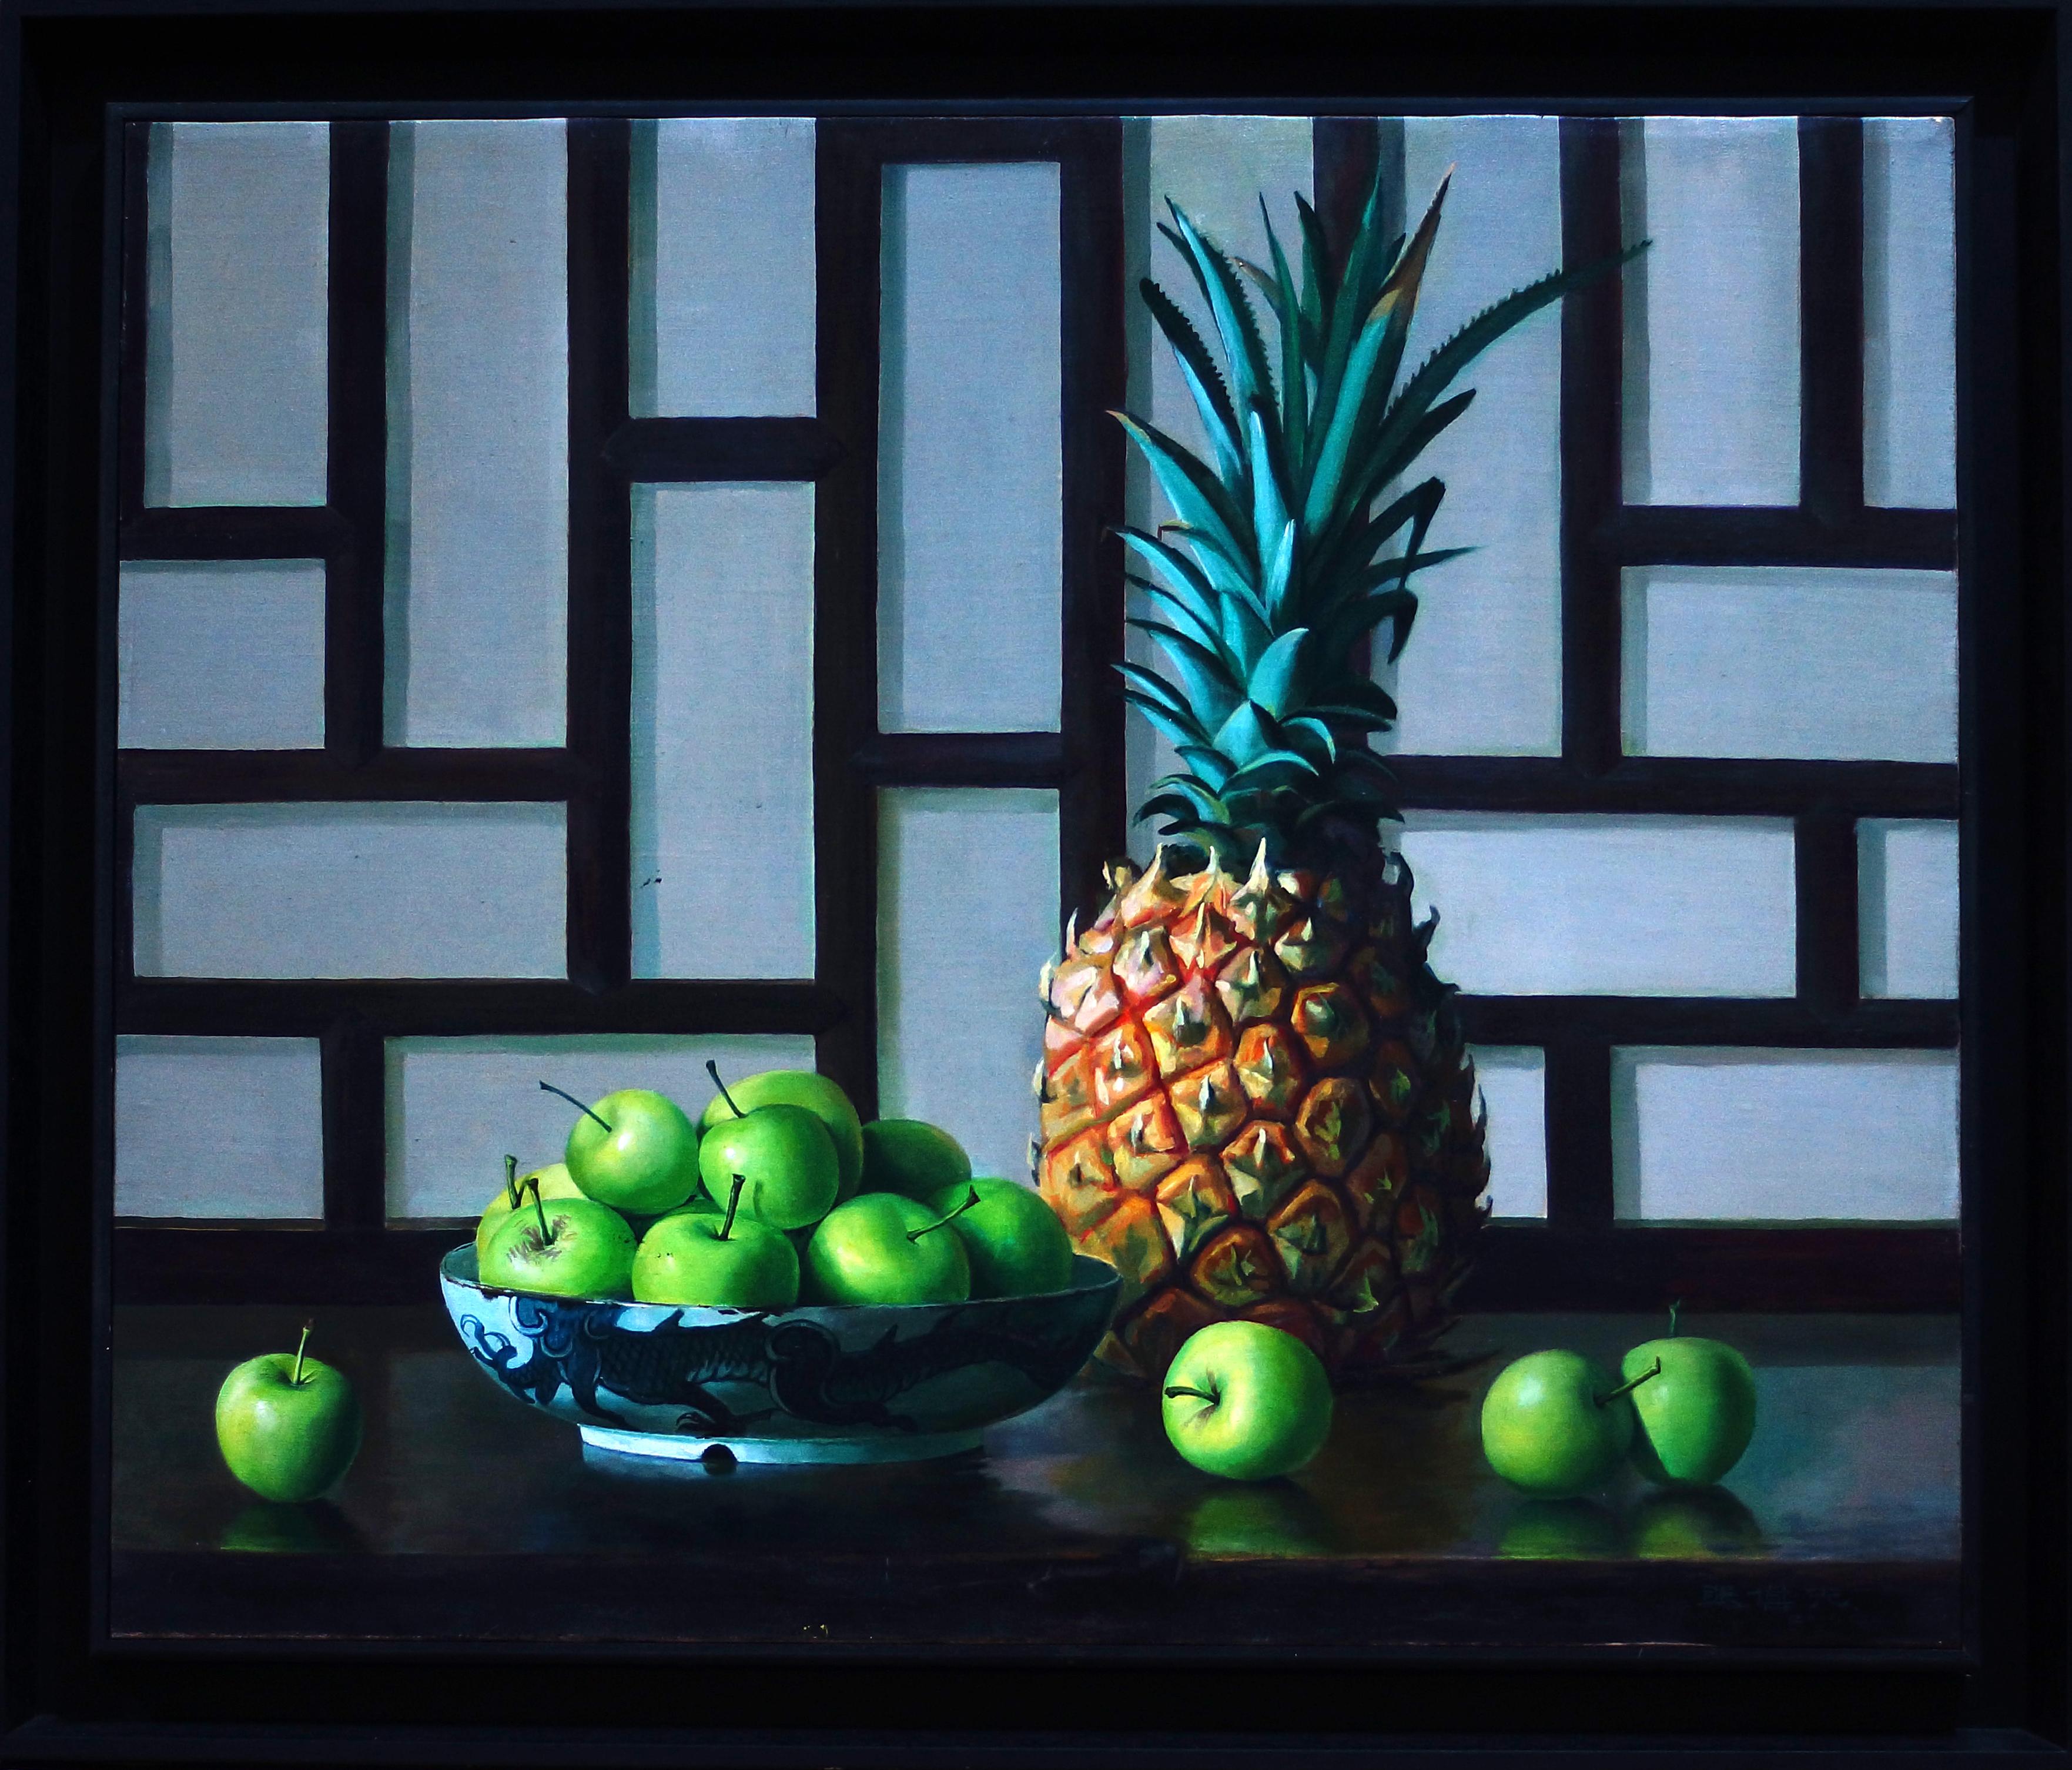 Pineapple and Apples is an original oil on canvas realized by the chinese painter Zhang Wei Guang (Mirror) in 2001.
Excellent conditions.

Zhang Wei Guang, also called ‘mirror' was born in Helong Jang, China in 1968. He studied at the Haierbin